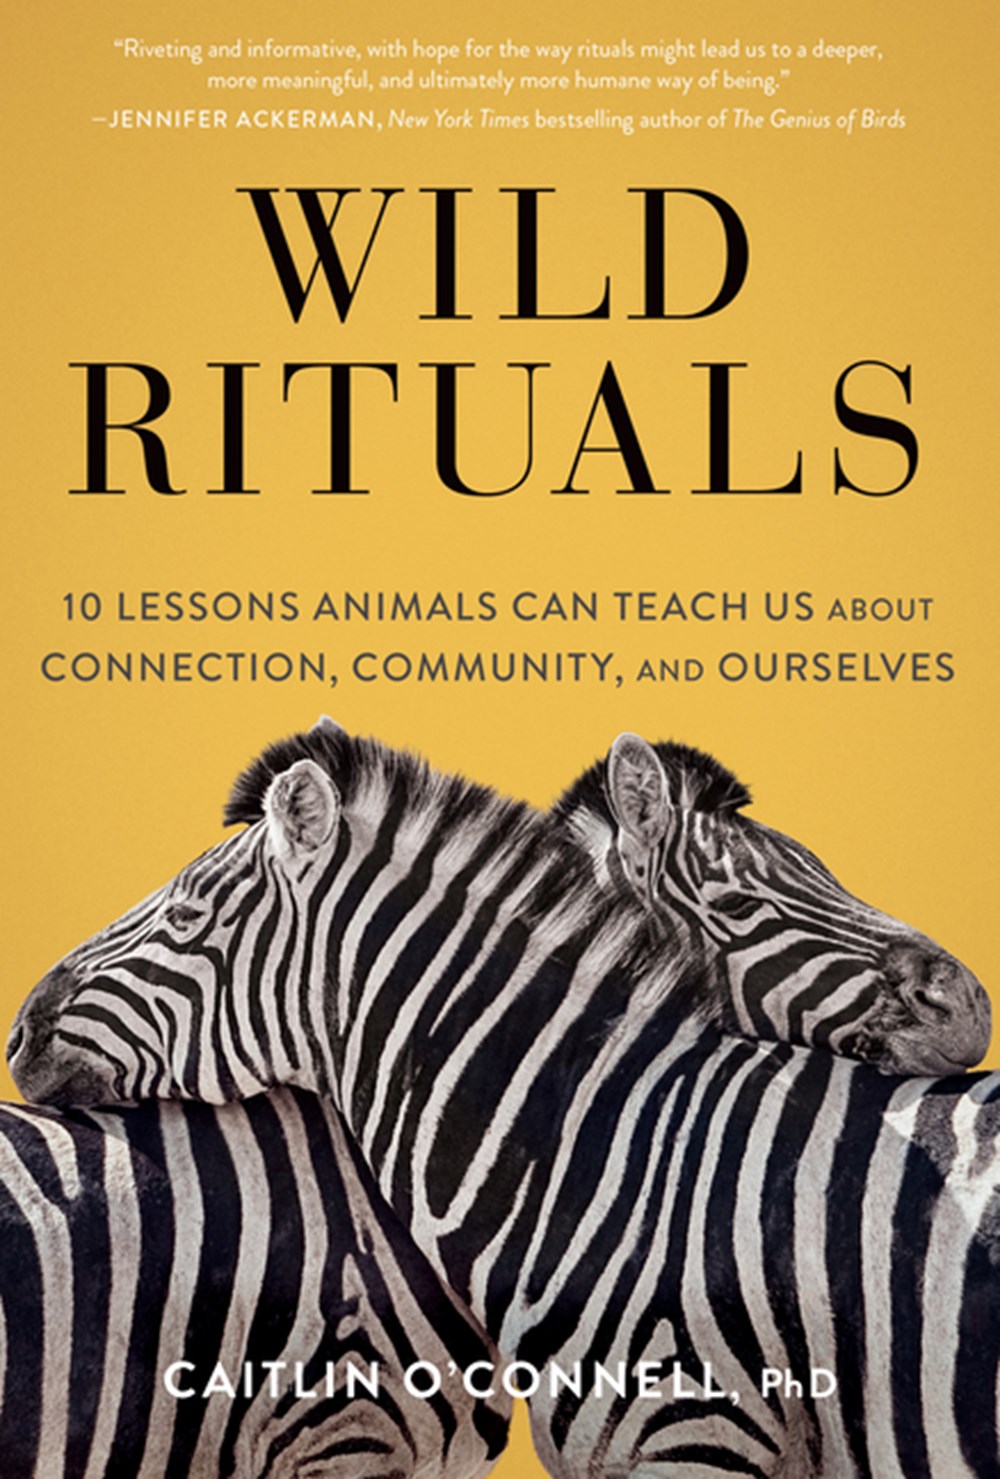 Wild Rituals 10 Lessons Animals Can Teach Us about Connection, Community, and Ourselves